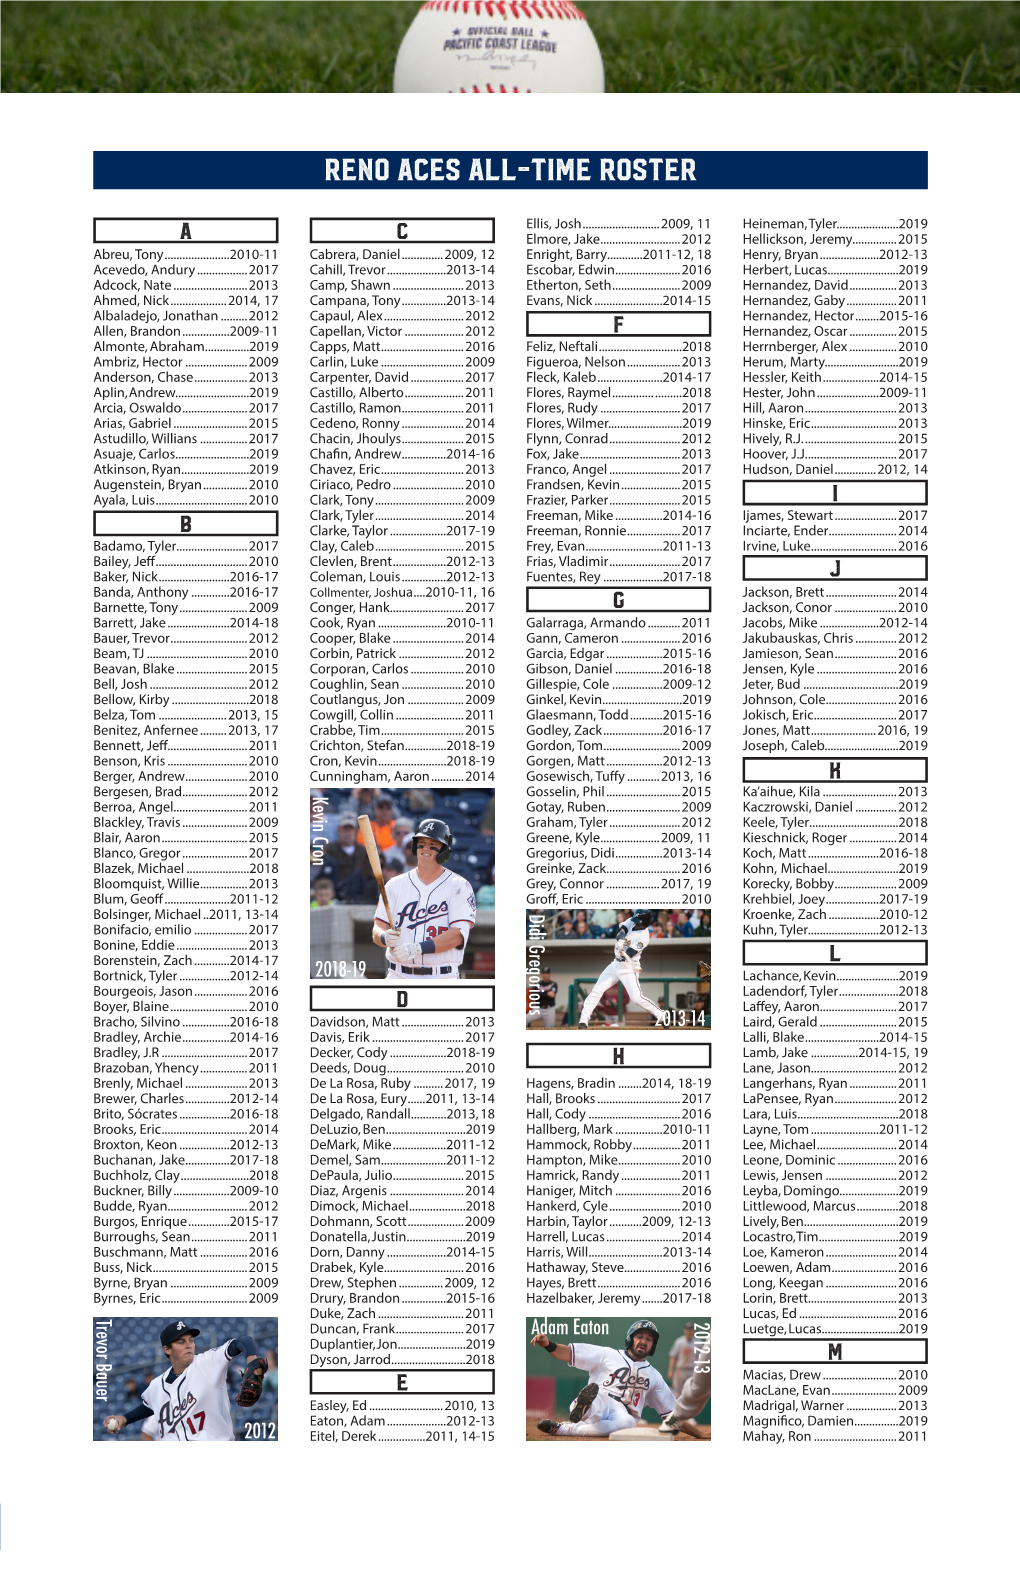 36 Reno Aces All-Time Roster